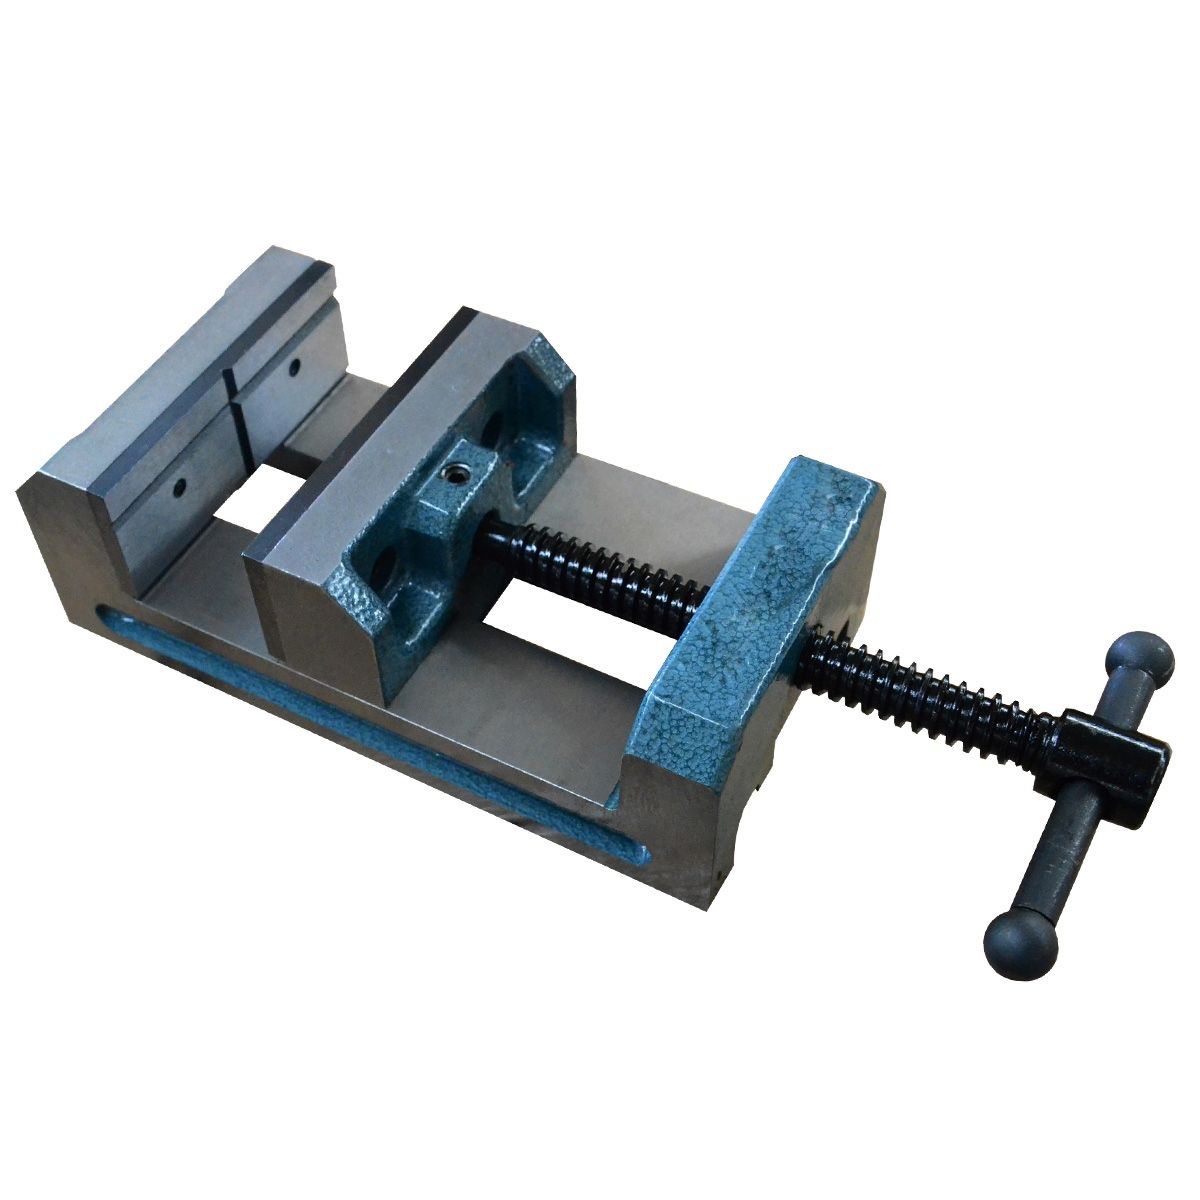 PRO-SERIES INDUSTRIAL 4" DRILL PRESS VISE (3901-0184)